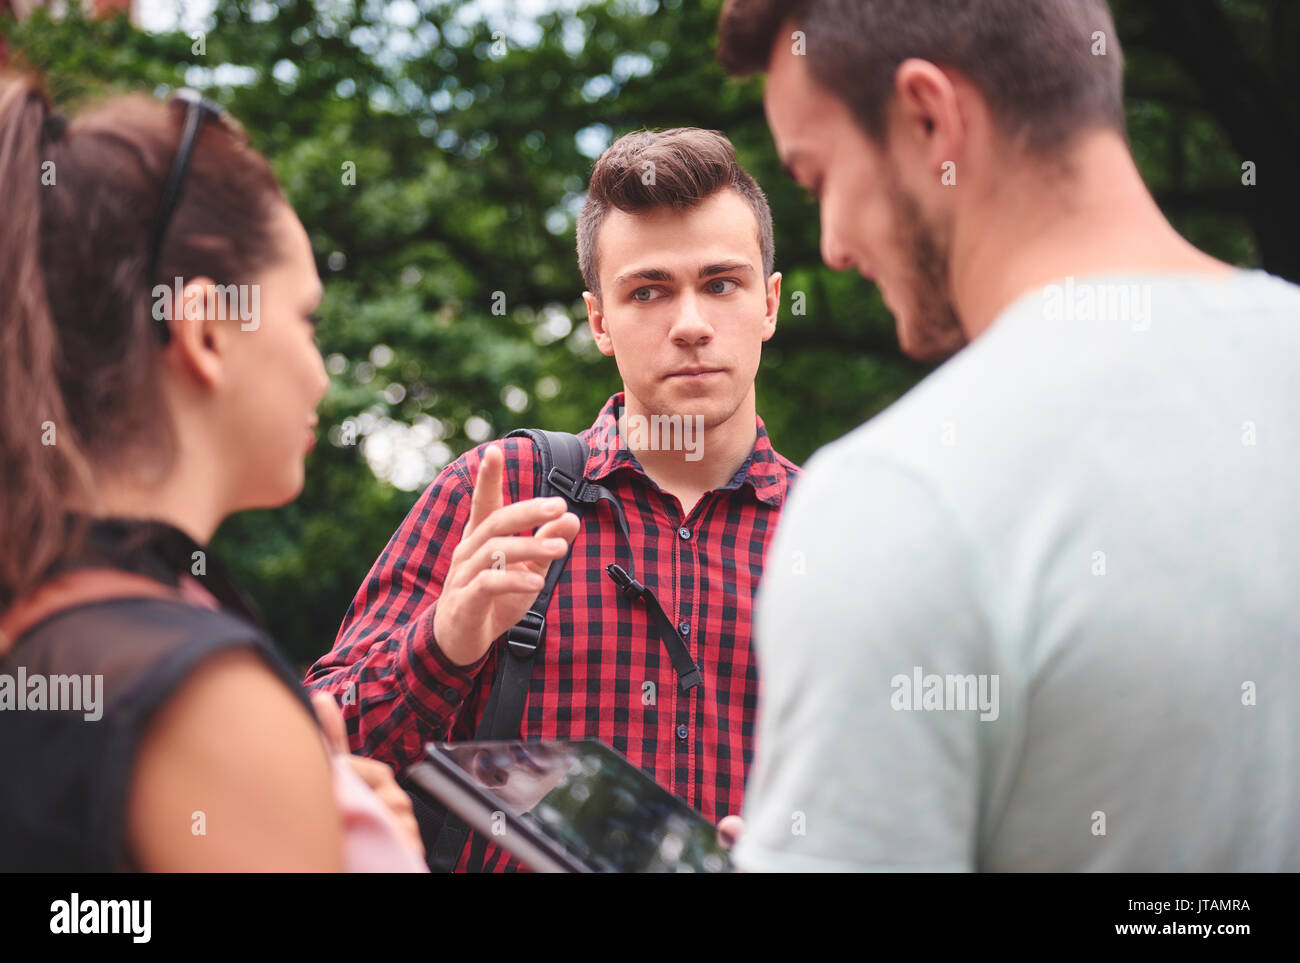 Angry man talking seriously outdoors Stock Photo